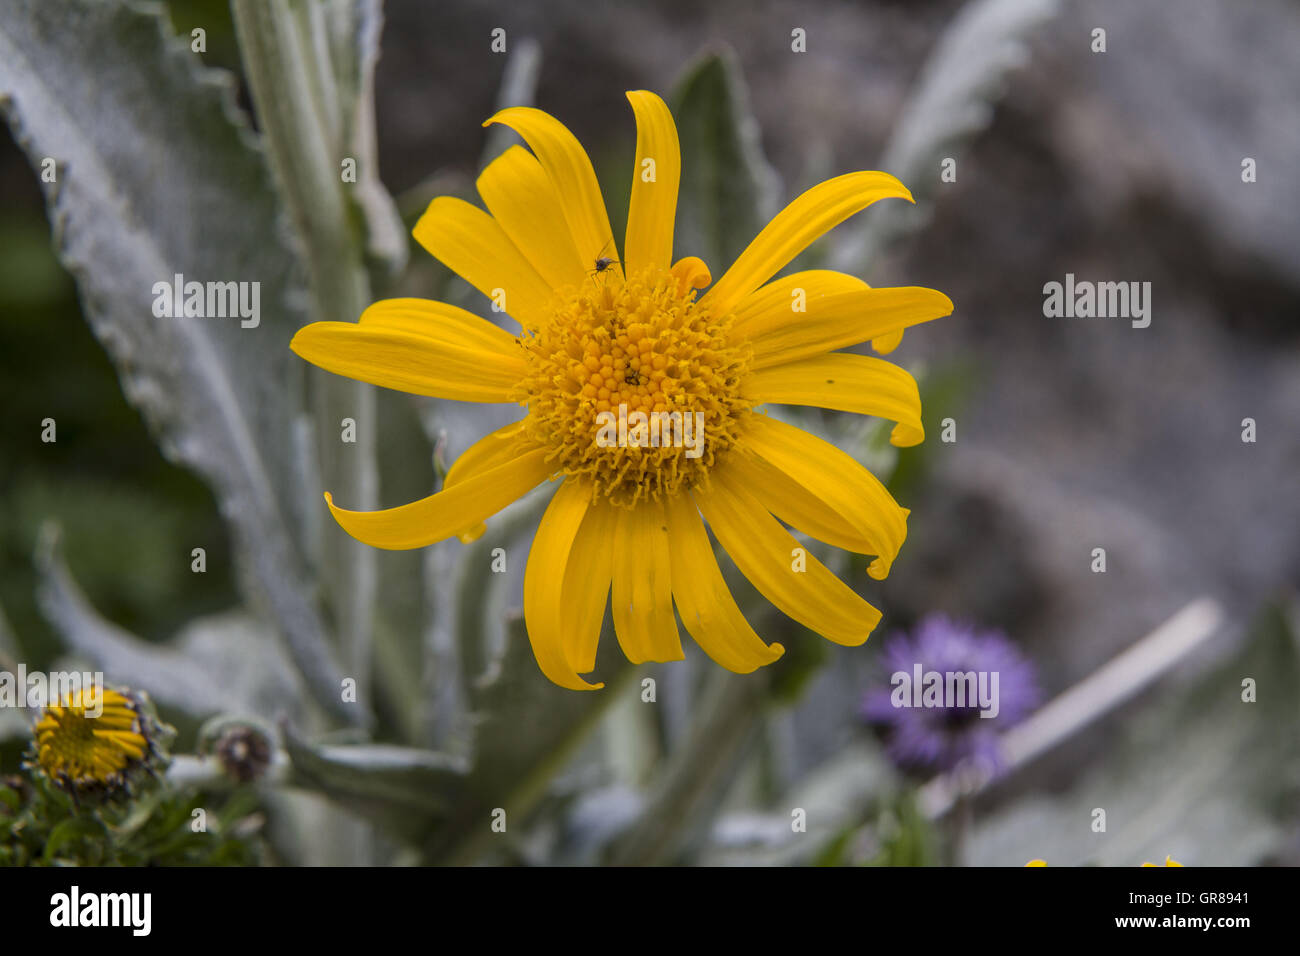 The True Arnica Belongs To The Sunflower Family And Is A Protected Medicinal Plant Stock Photo